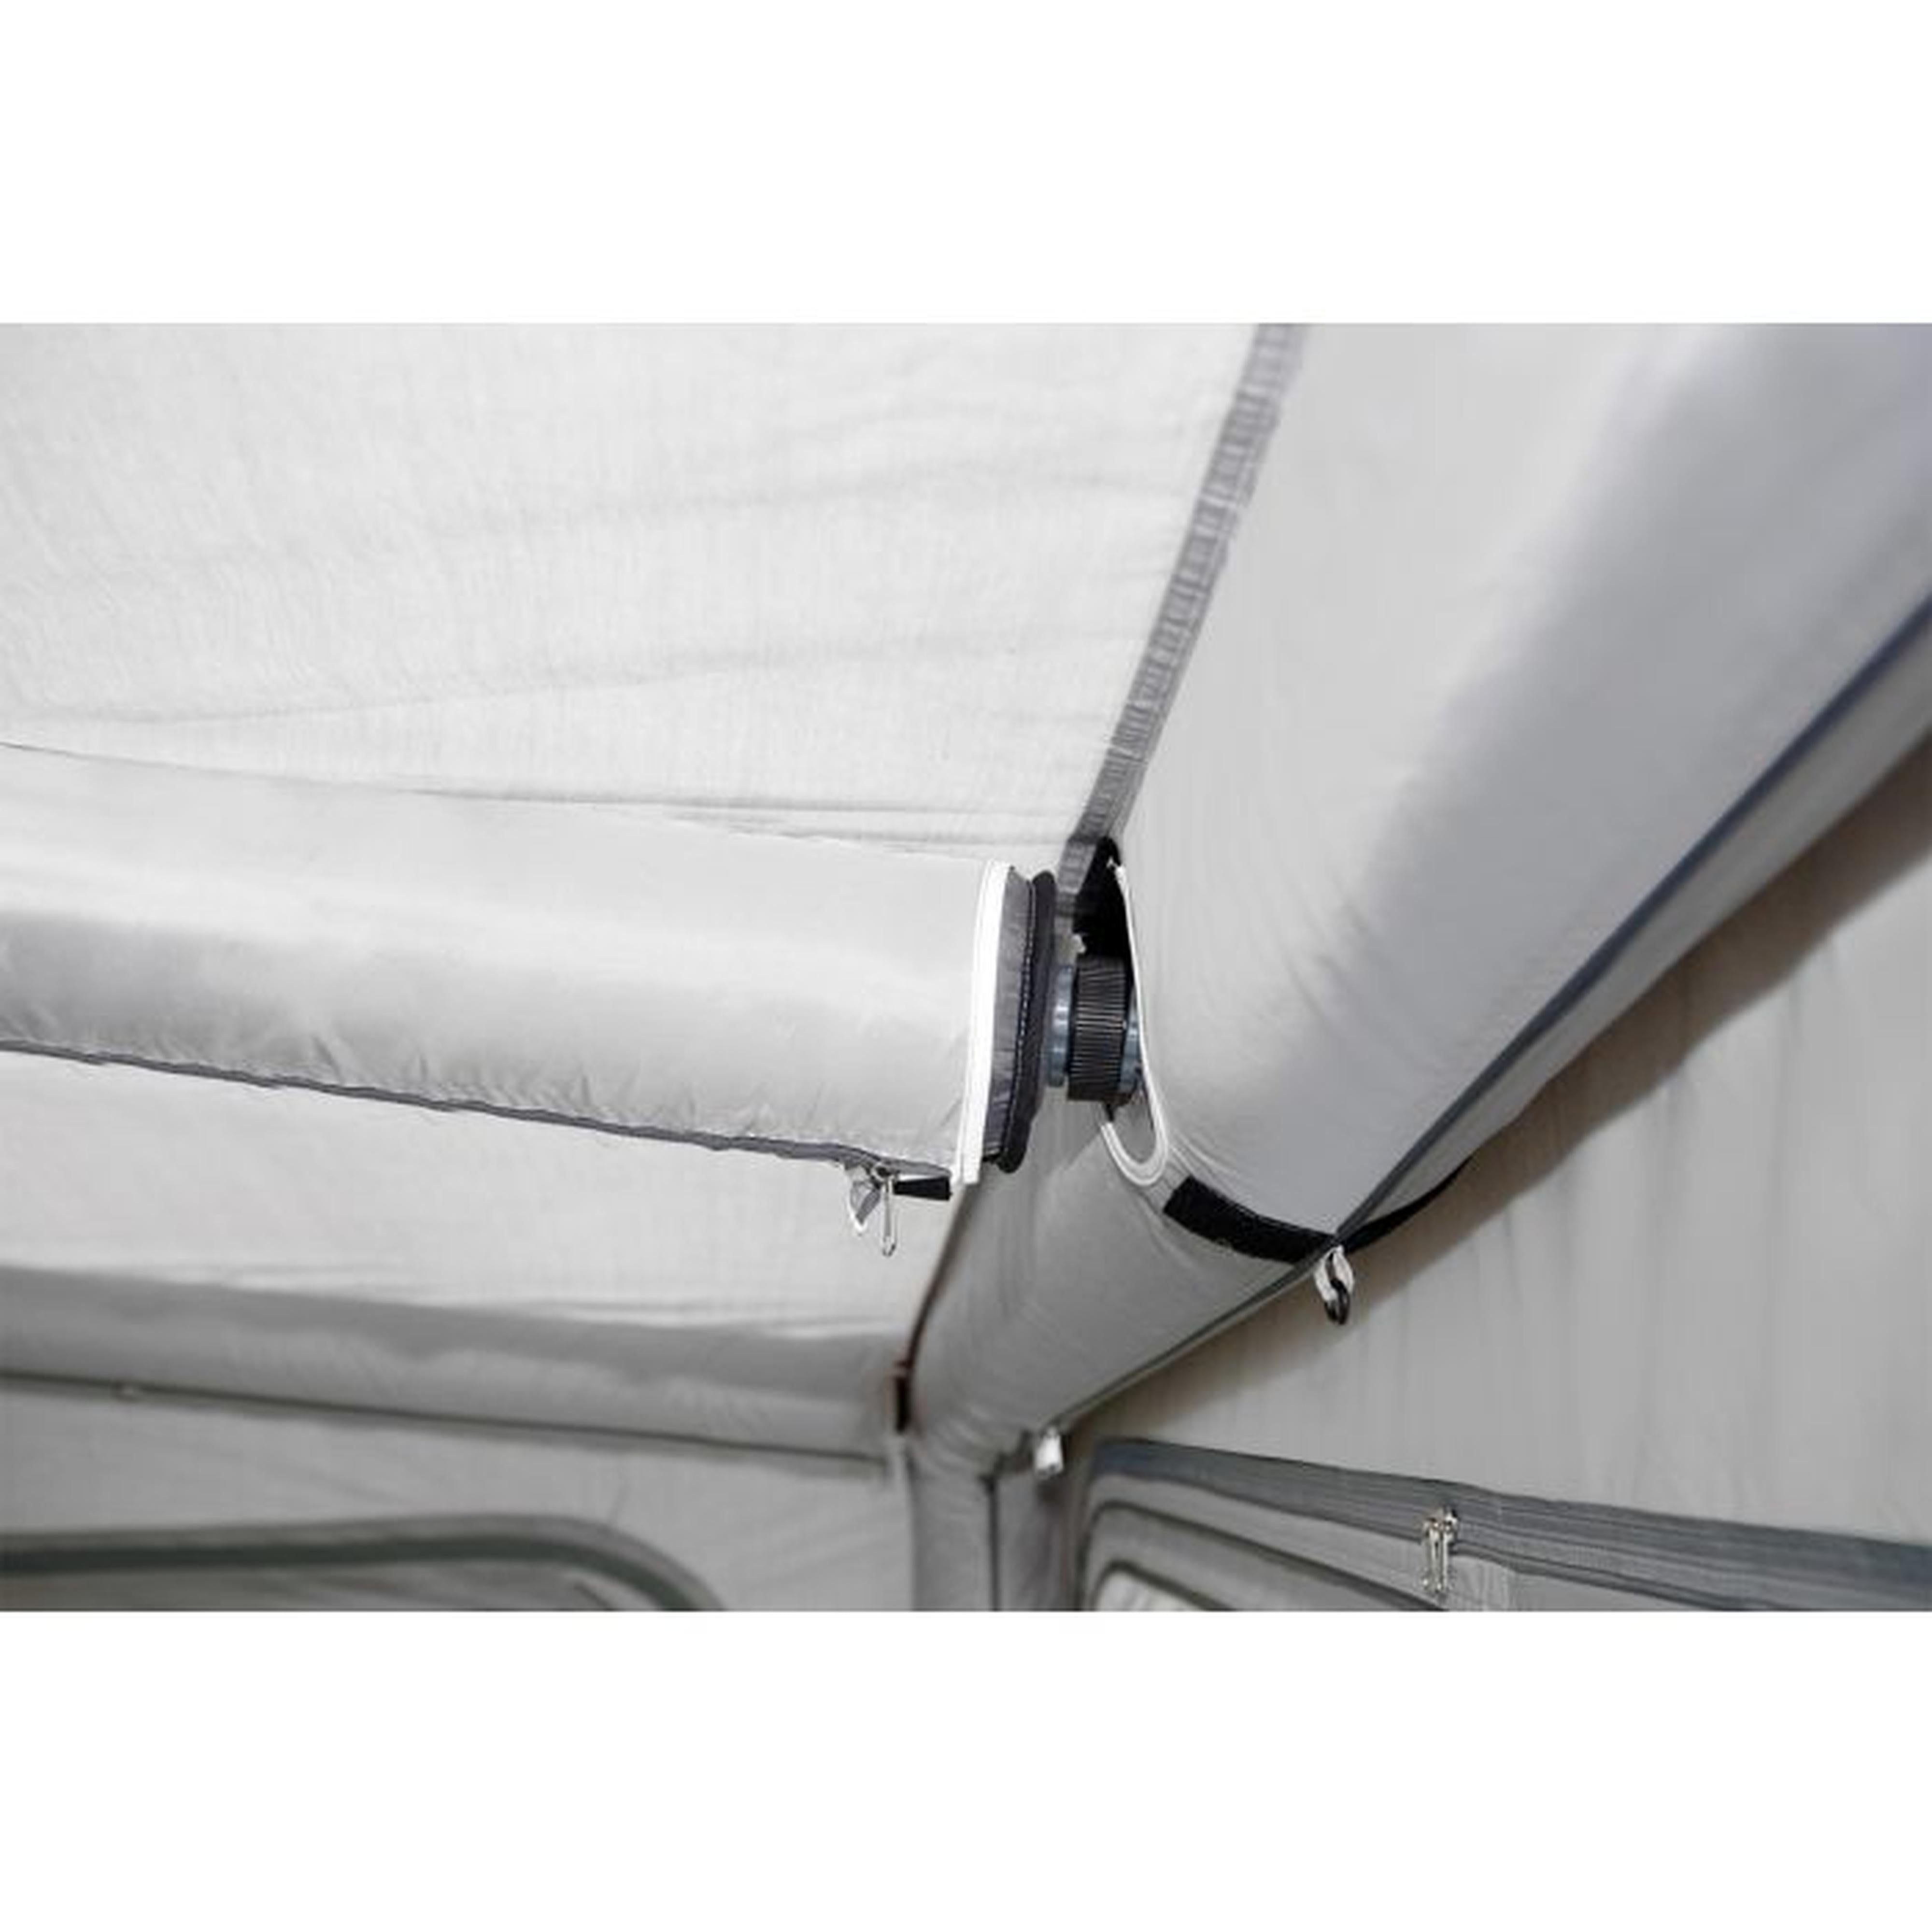 Westfield Pluto Performance Full Air Awning 1016 - 1050cm